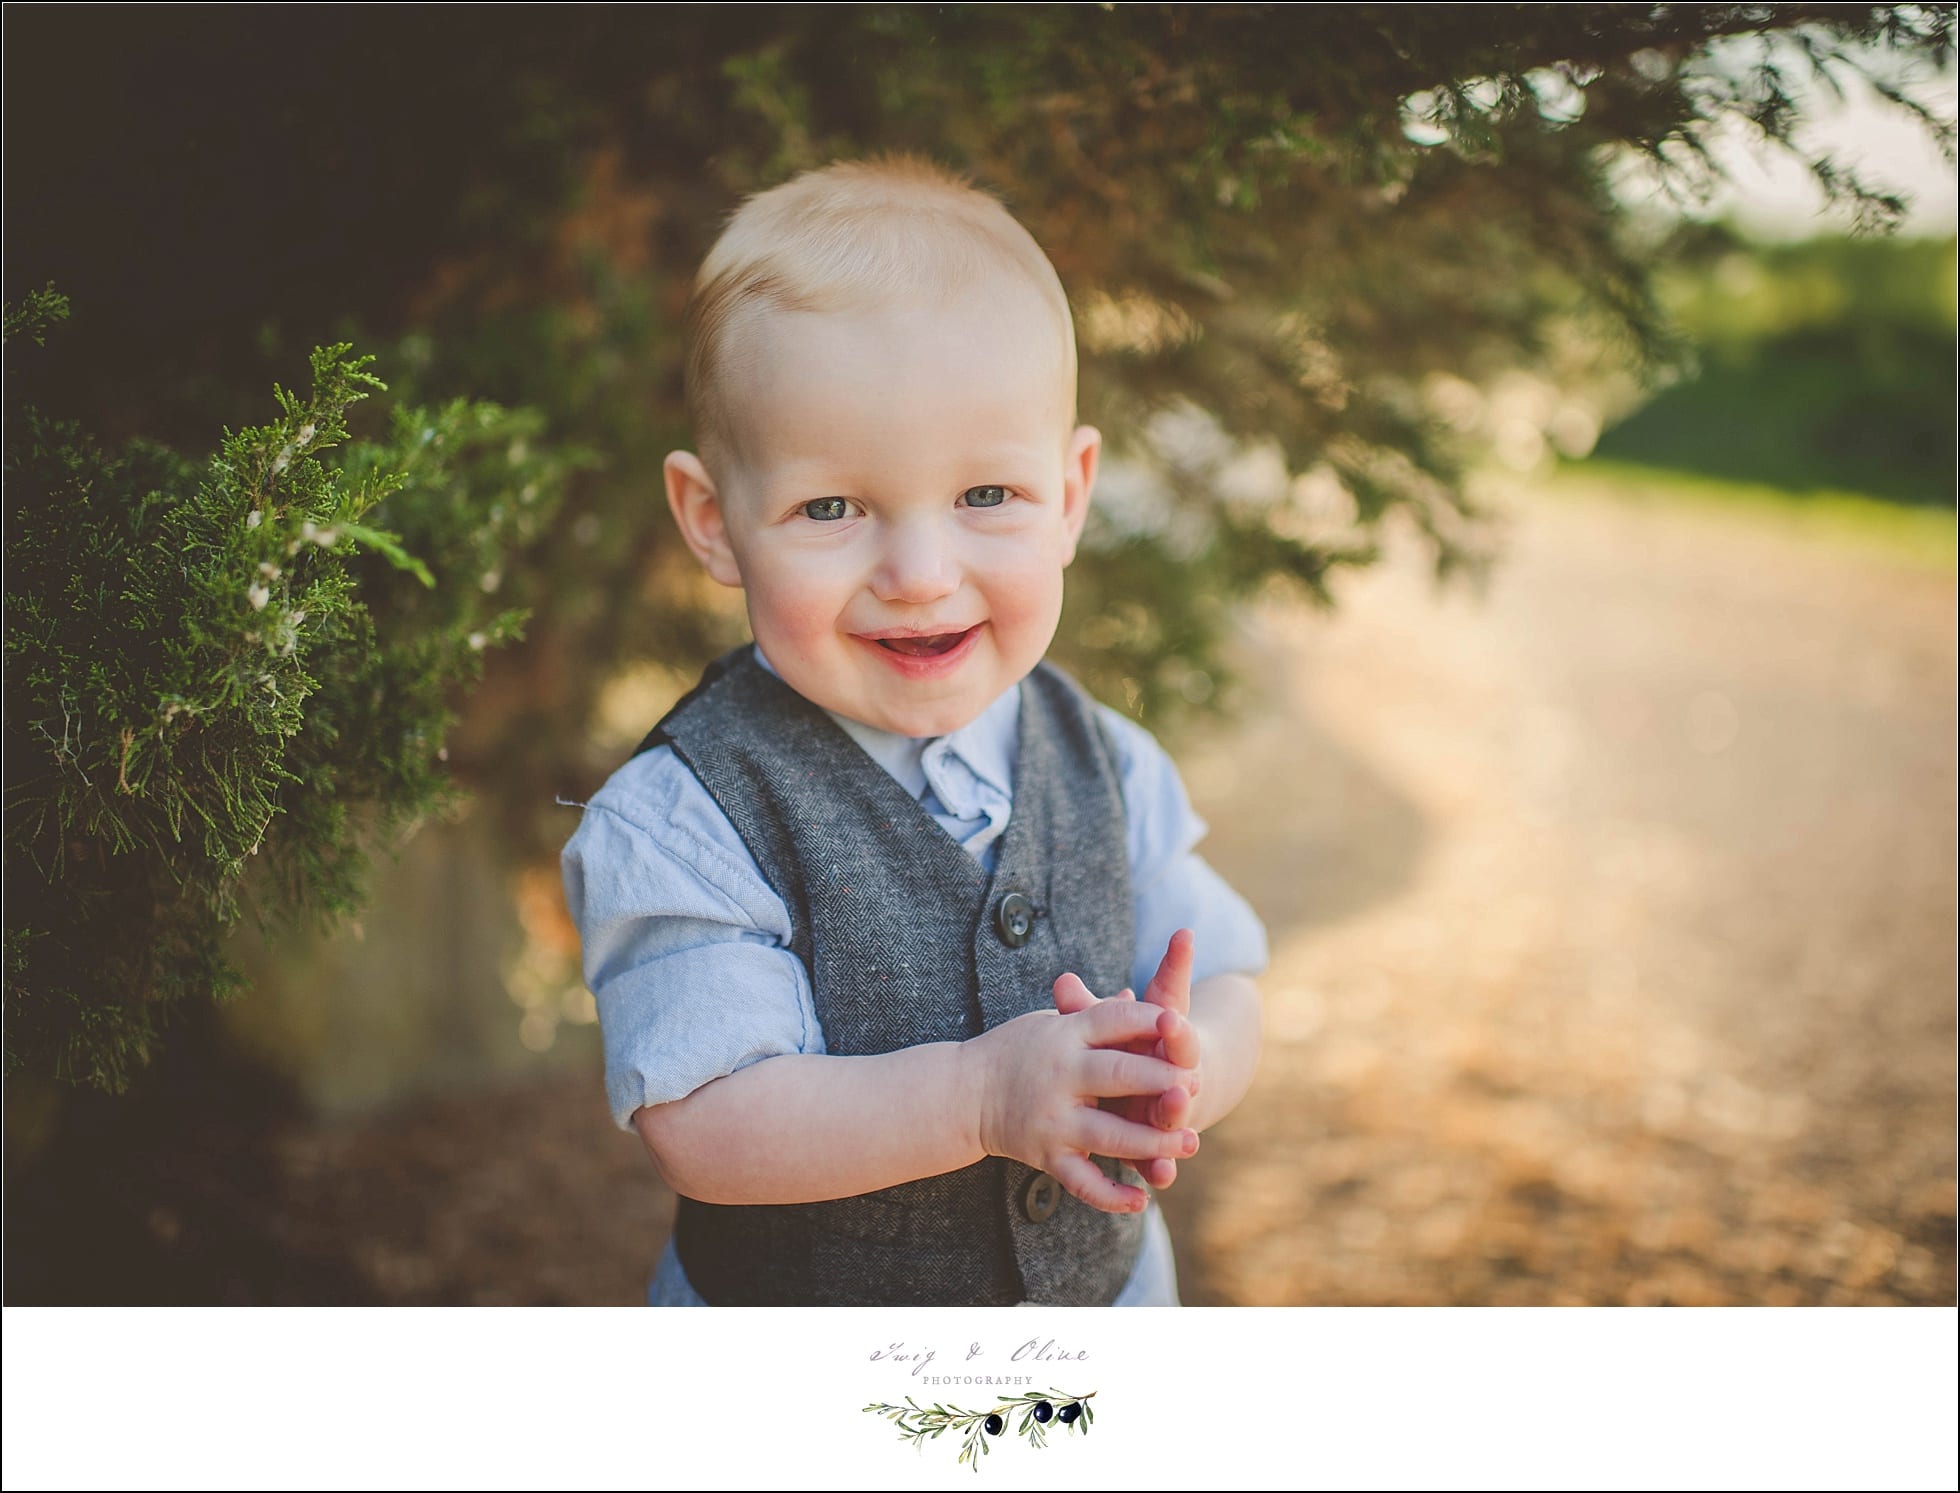 Madison mini sessions, children and families, brothers, boys will be boys, moms and dads, sunset photography, happy families, Twig and Olive